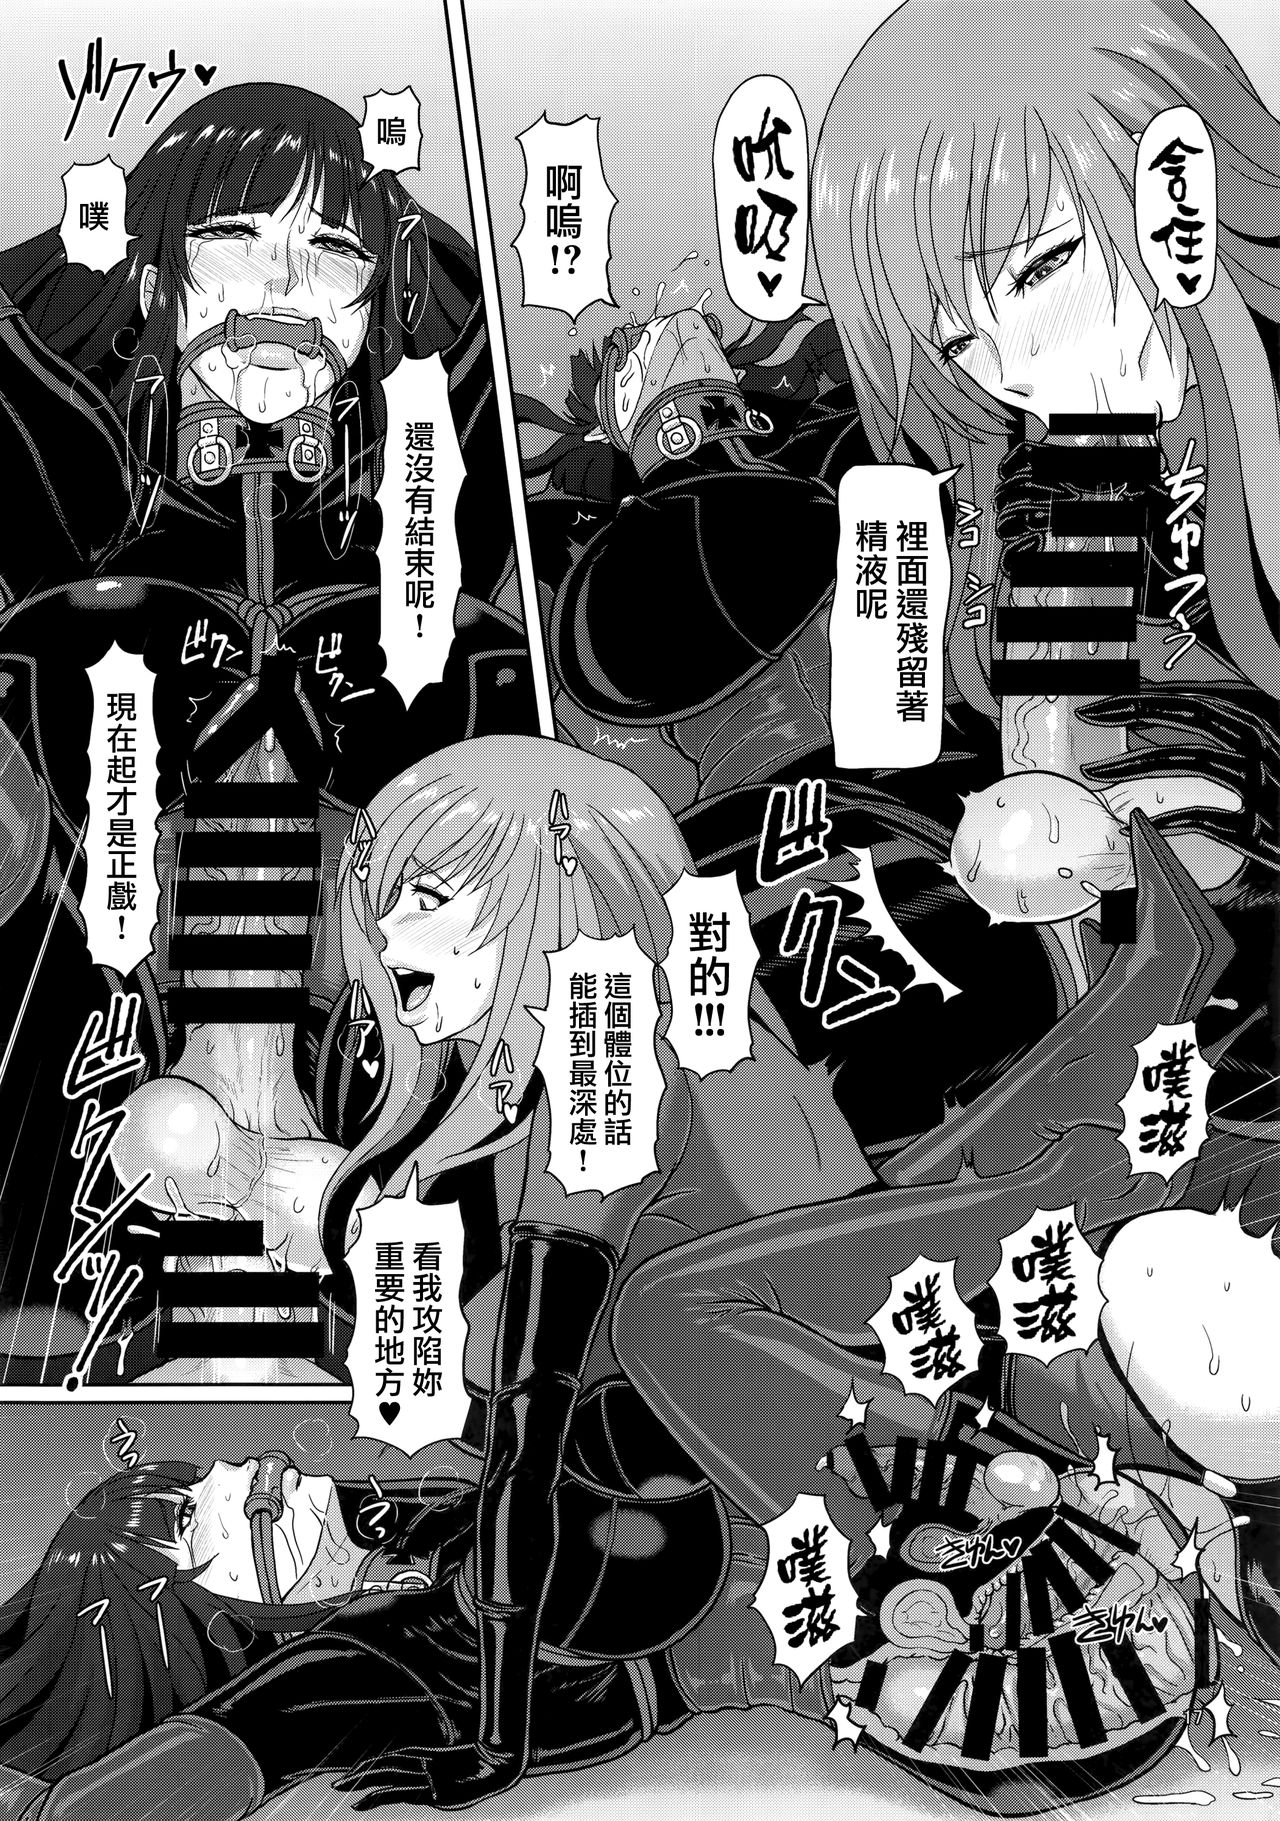 (C92) [SERIOUS GRAPHICS (ICE)] ICE BOXXX 21 ACT OF DARKNESS (Girls und Panzer) [Chinese] [无毒汉化组扶毒分部] page 19 full